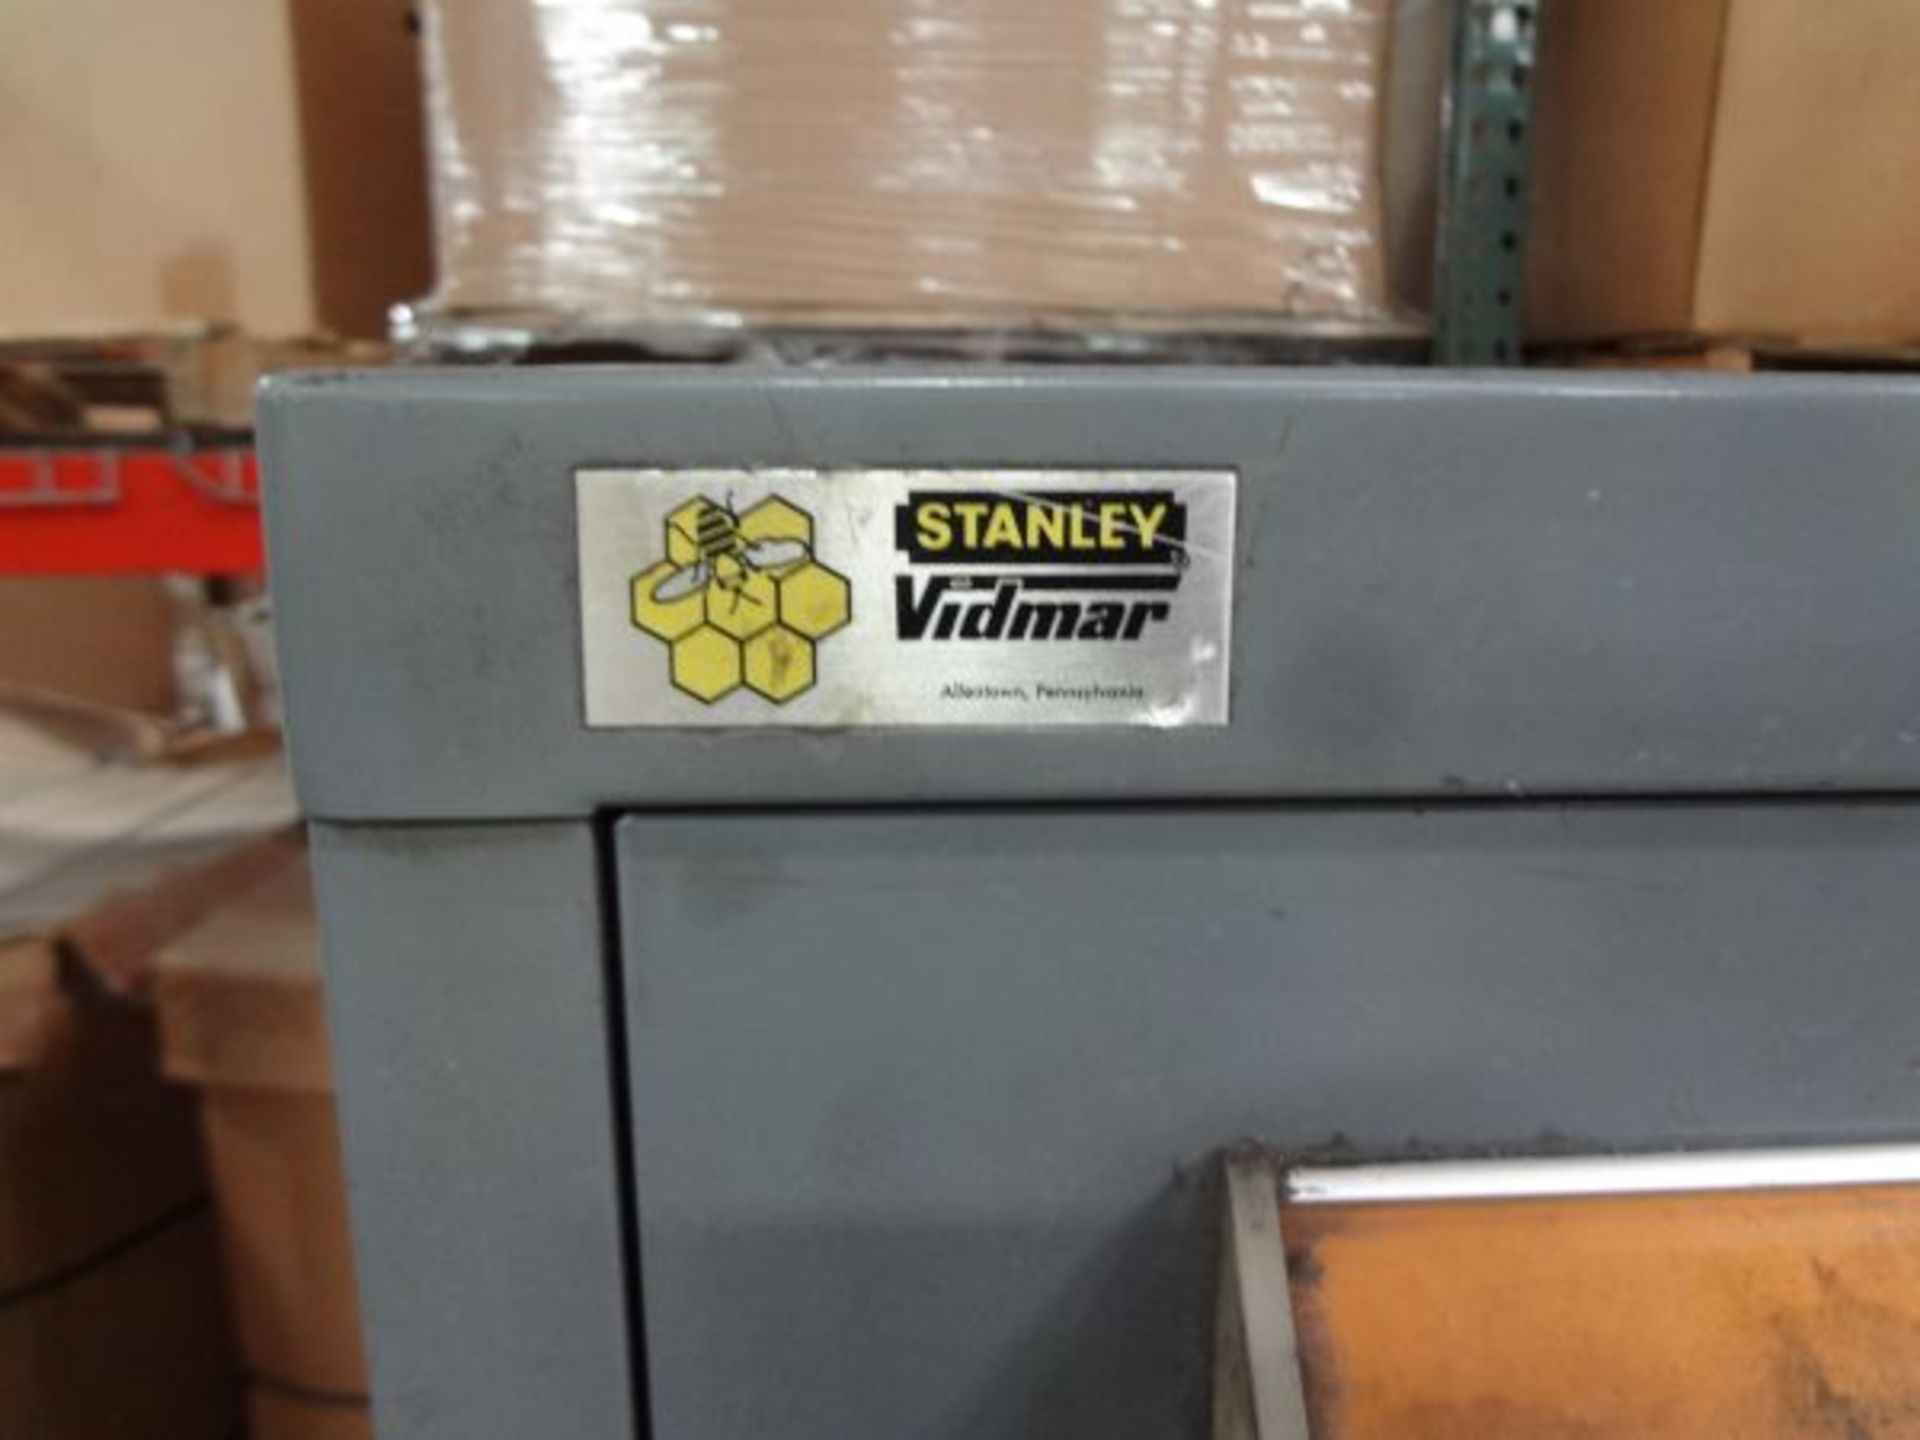 STANLEY VIDMAR 10-DRAWER TOOLING CABINET, 28" X 30" WIDE X 59" HIGH - Image 3 of 3